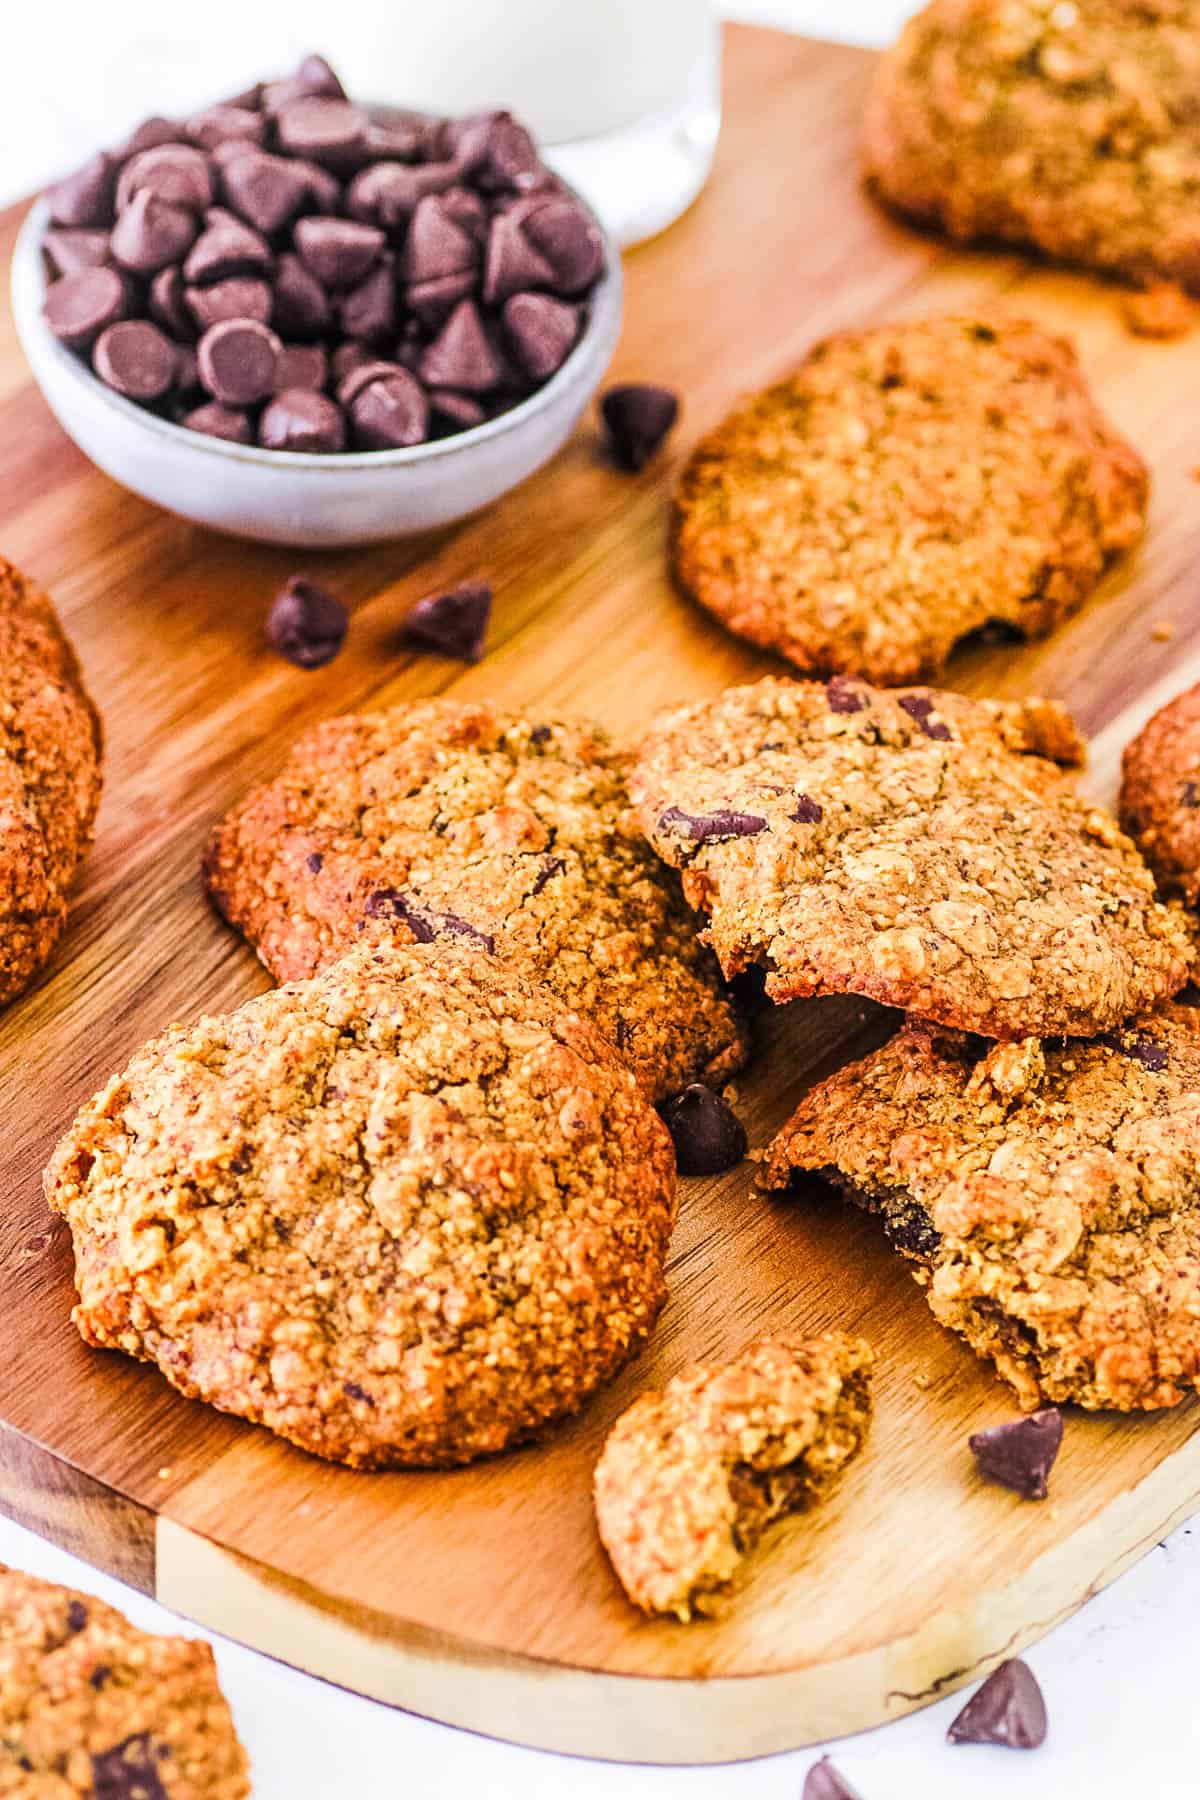 Healthy, vegan, gluten free lactation cookies stacked on a wooden cutting board.